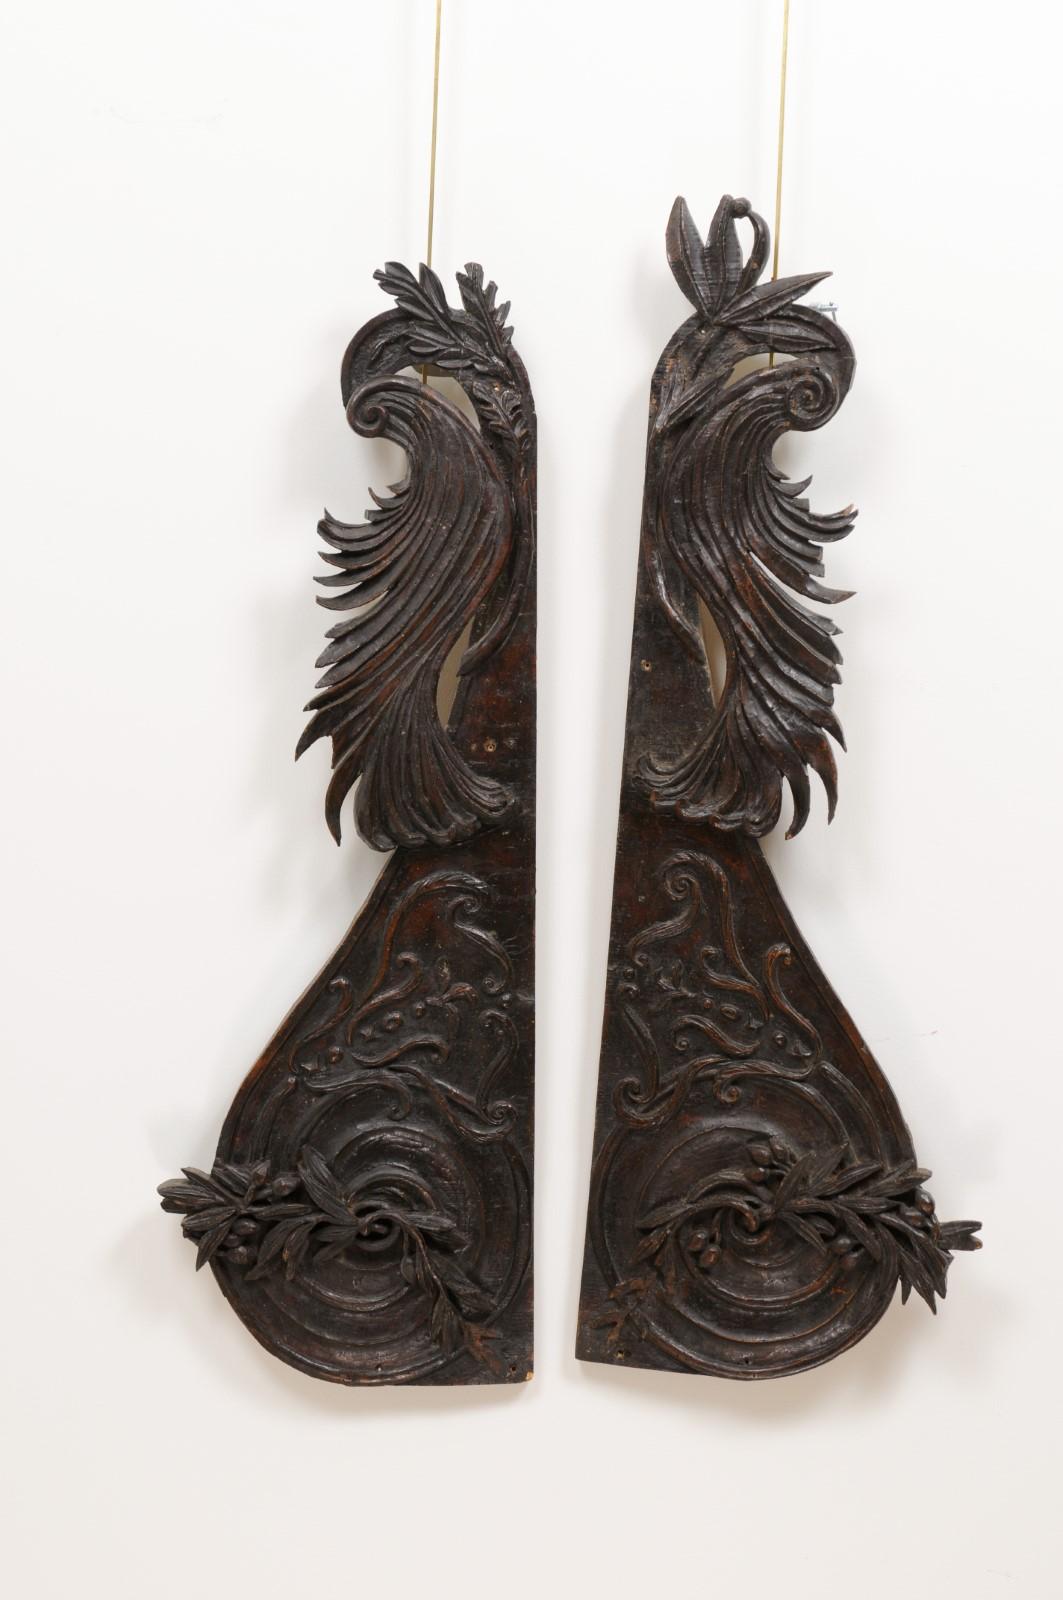 Pair of 18th century French Architectural carvings, ca. 1780.